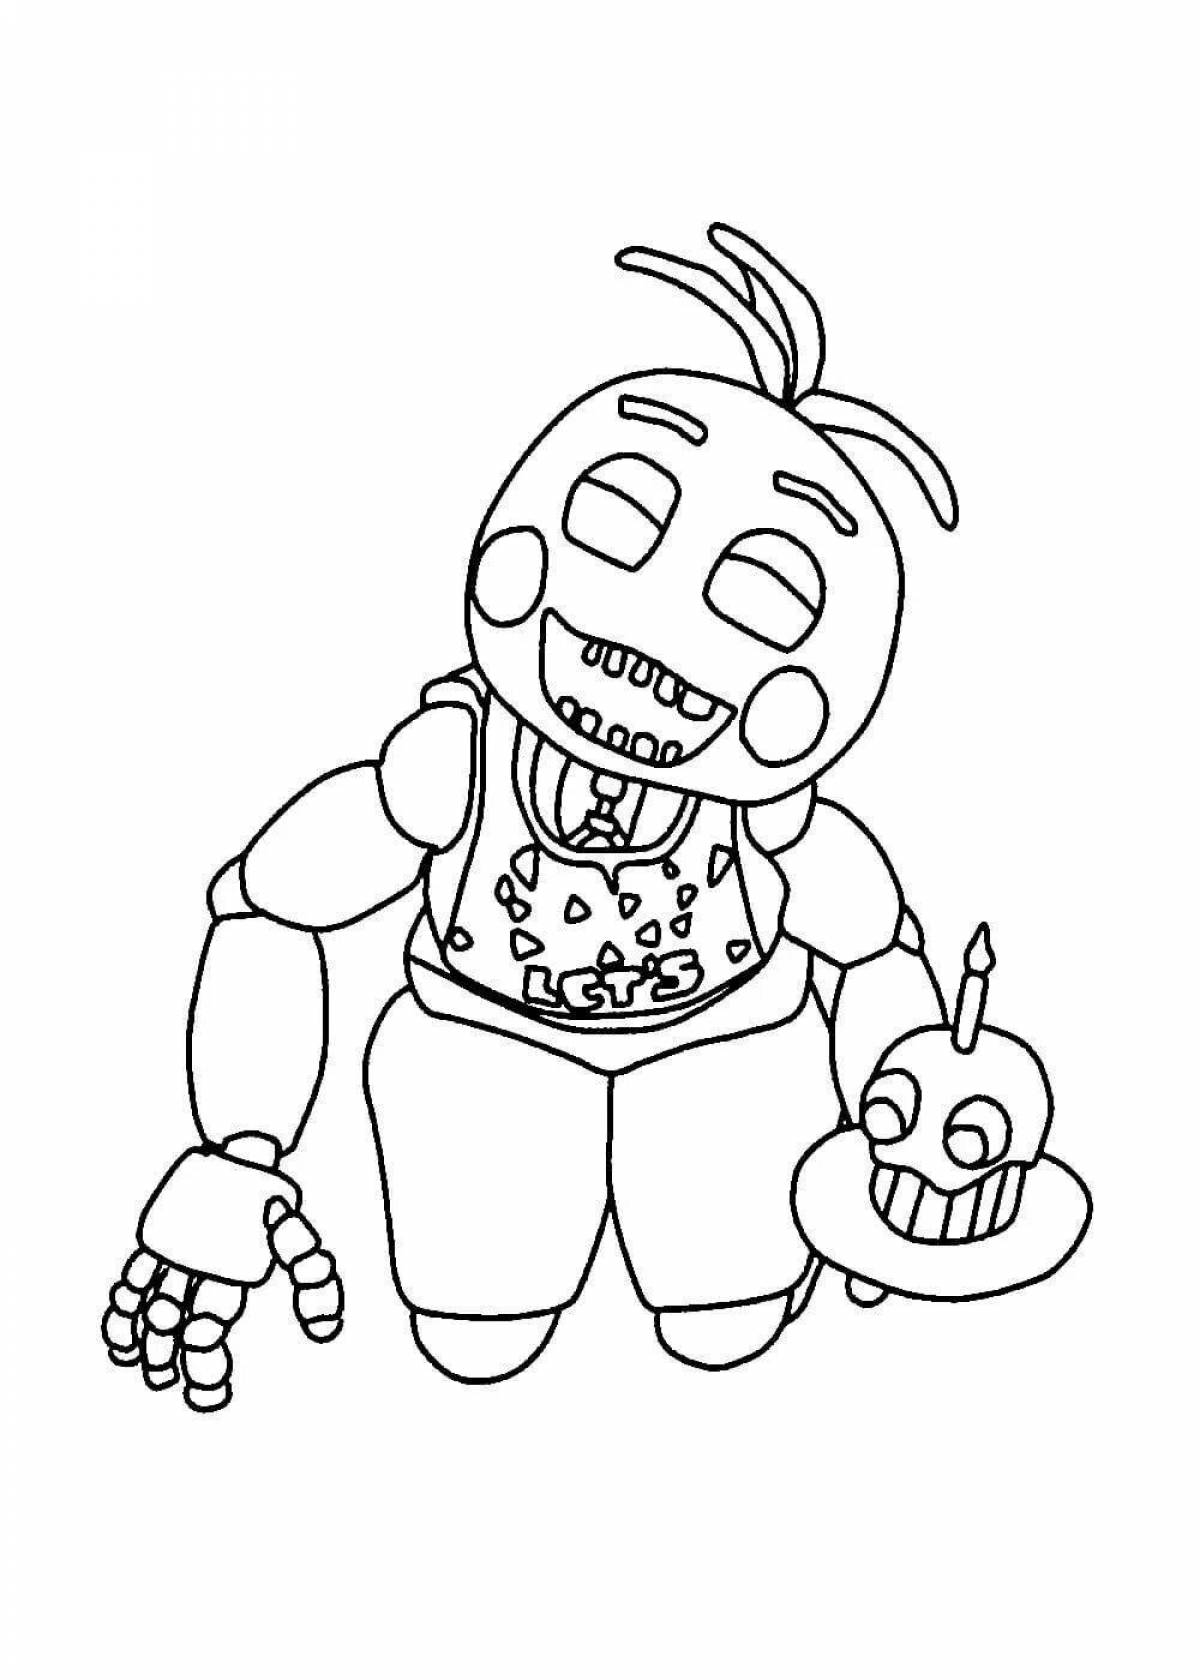 Fnaf 9 awesome coloring pages for boys